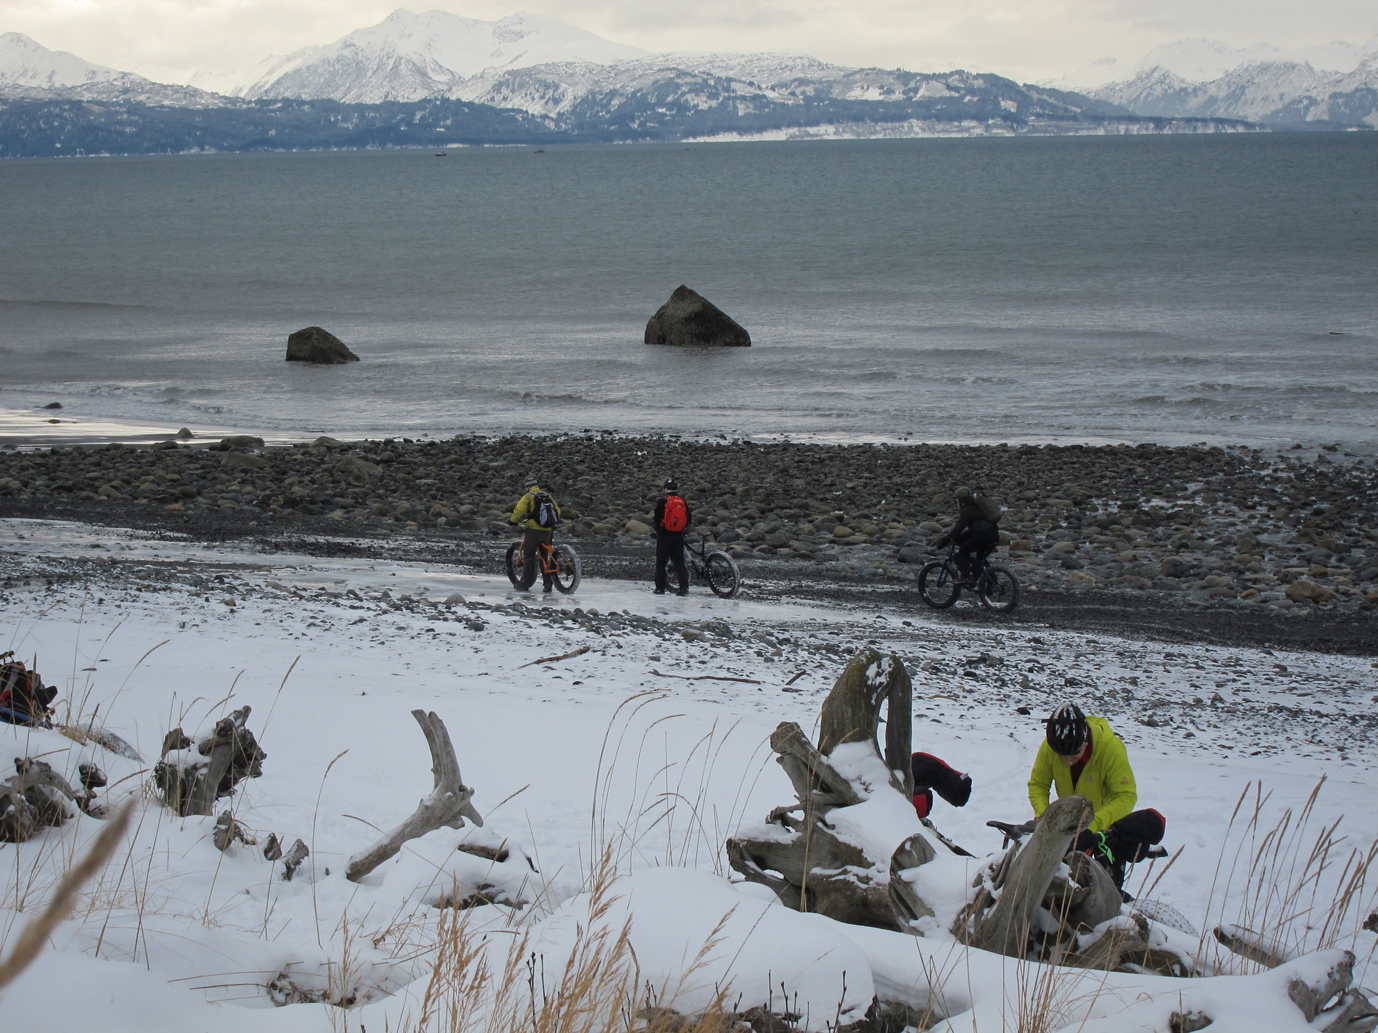 Participants in last weekend’s Big Fat Bike Fest enjoy a ride and camaraderie at Bishop’s Beach. Funds raised from the festival will go into an educational bike safety campaign.-Photo by Aryn Young